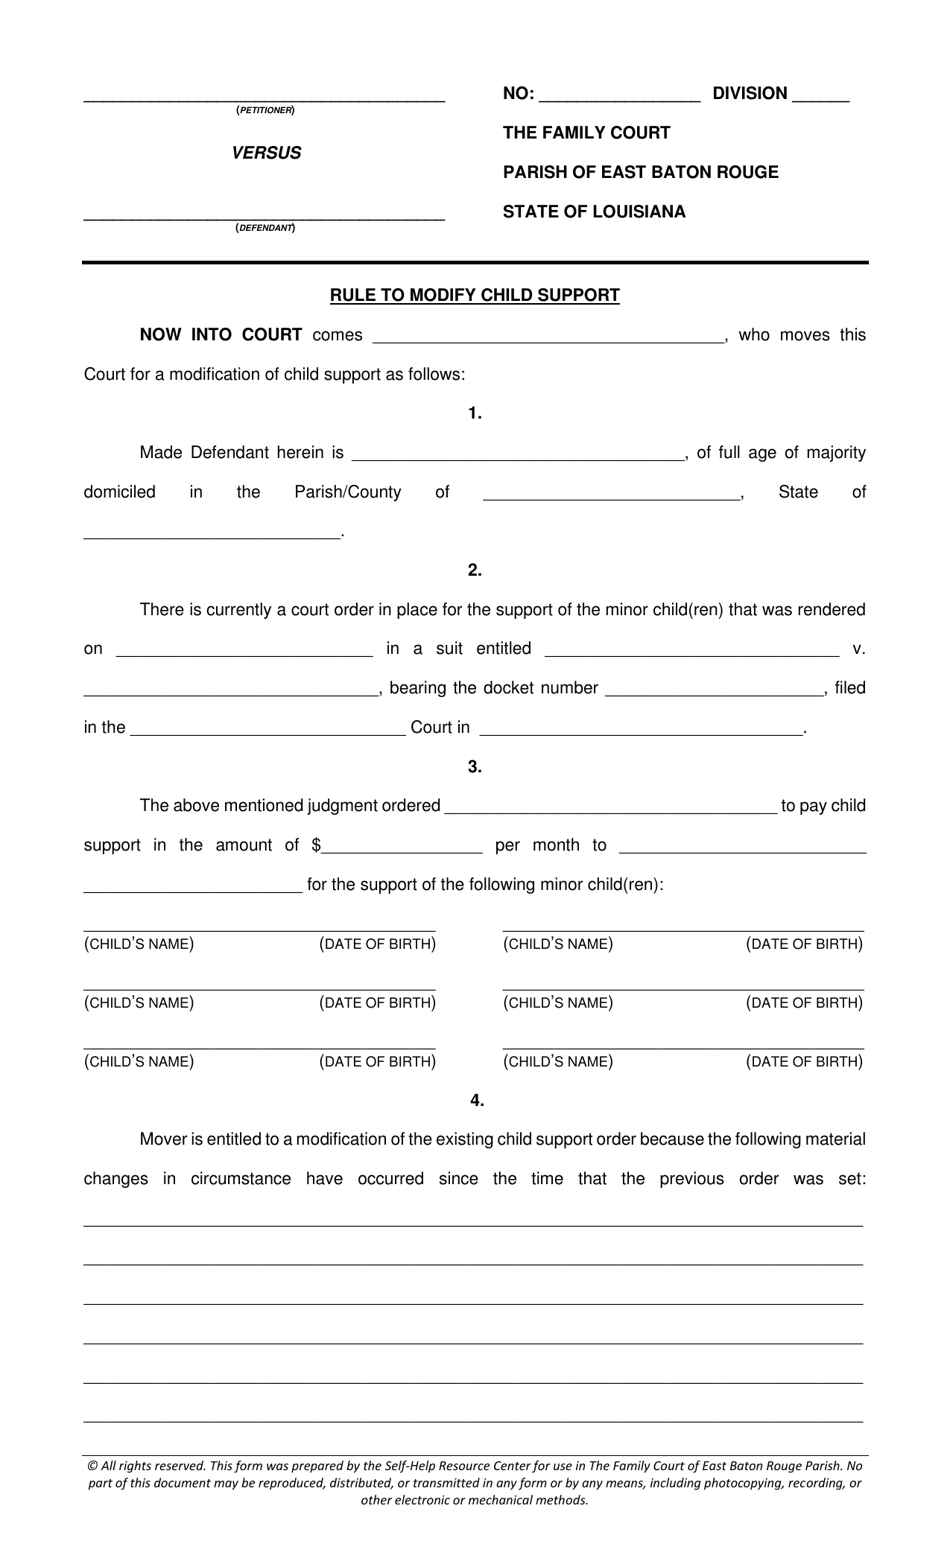 Rule to Modify Child Support - Parish of East Baton Rouge, Louisiana, Page 1